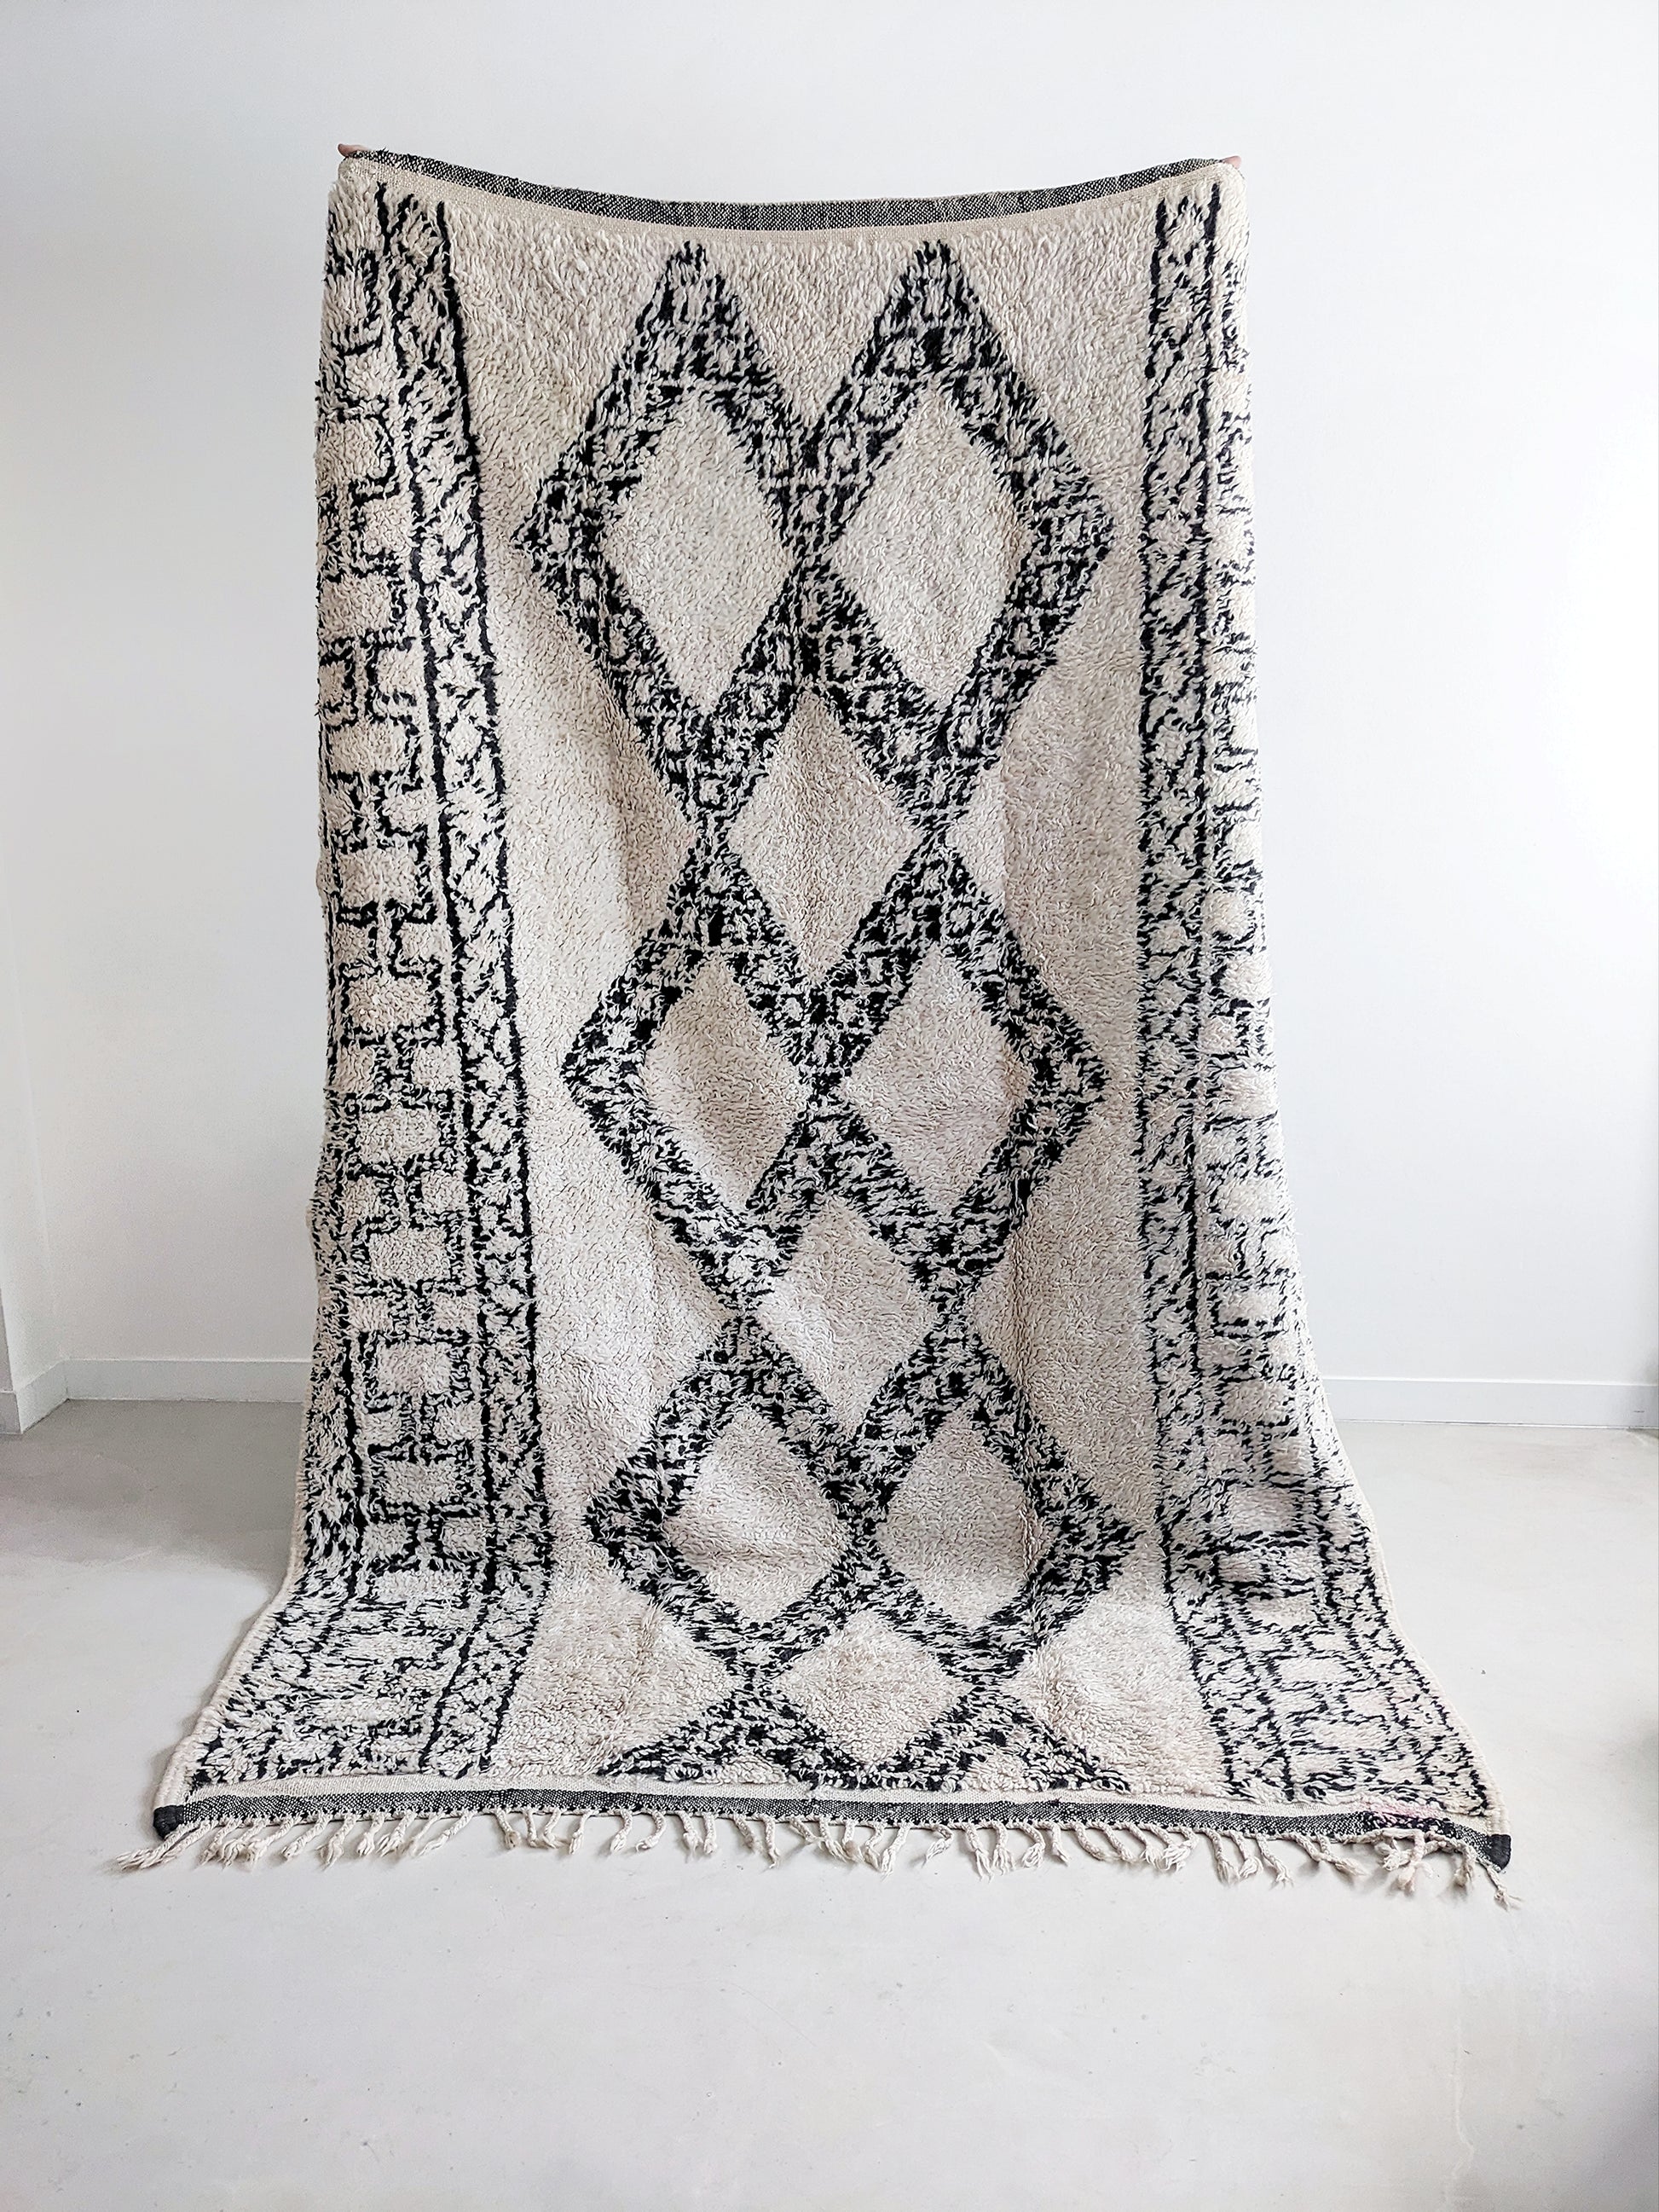 Black and white vintage MArmoucha Berber rug from the Atlas mountains in Morocco